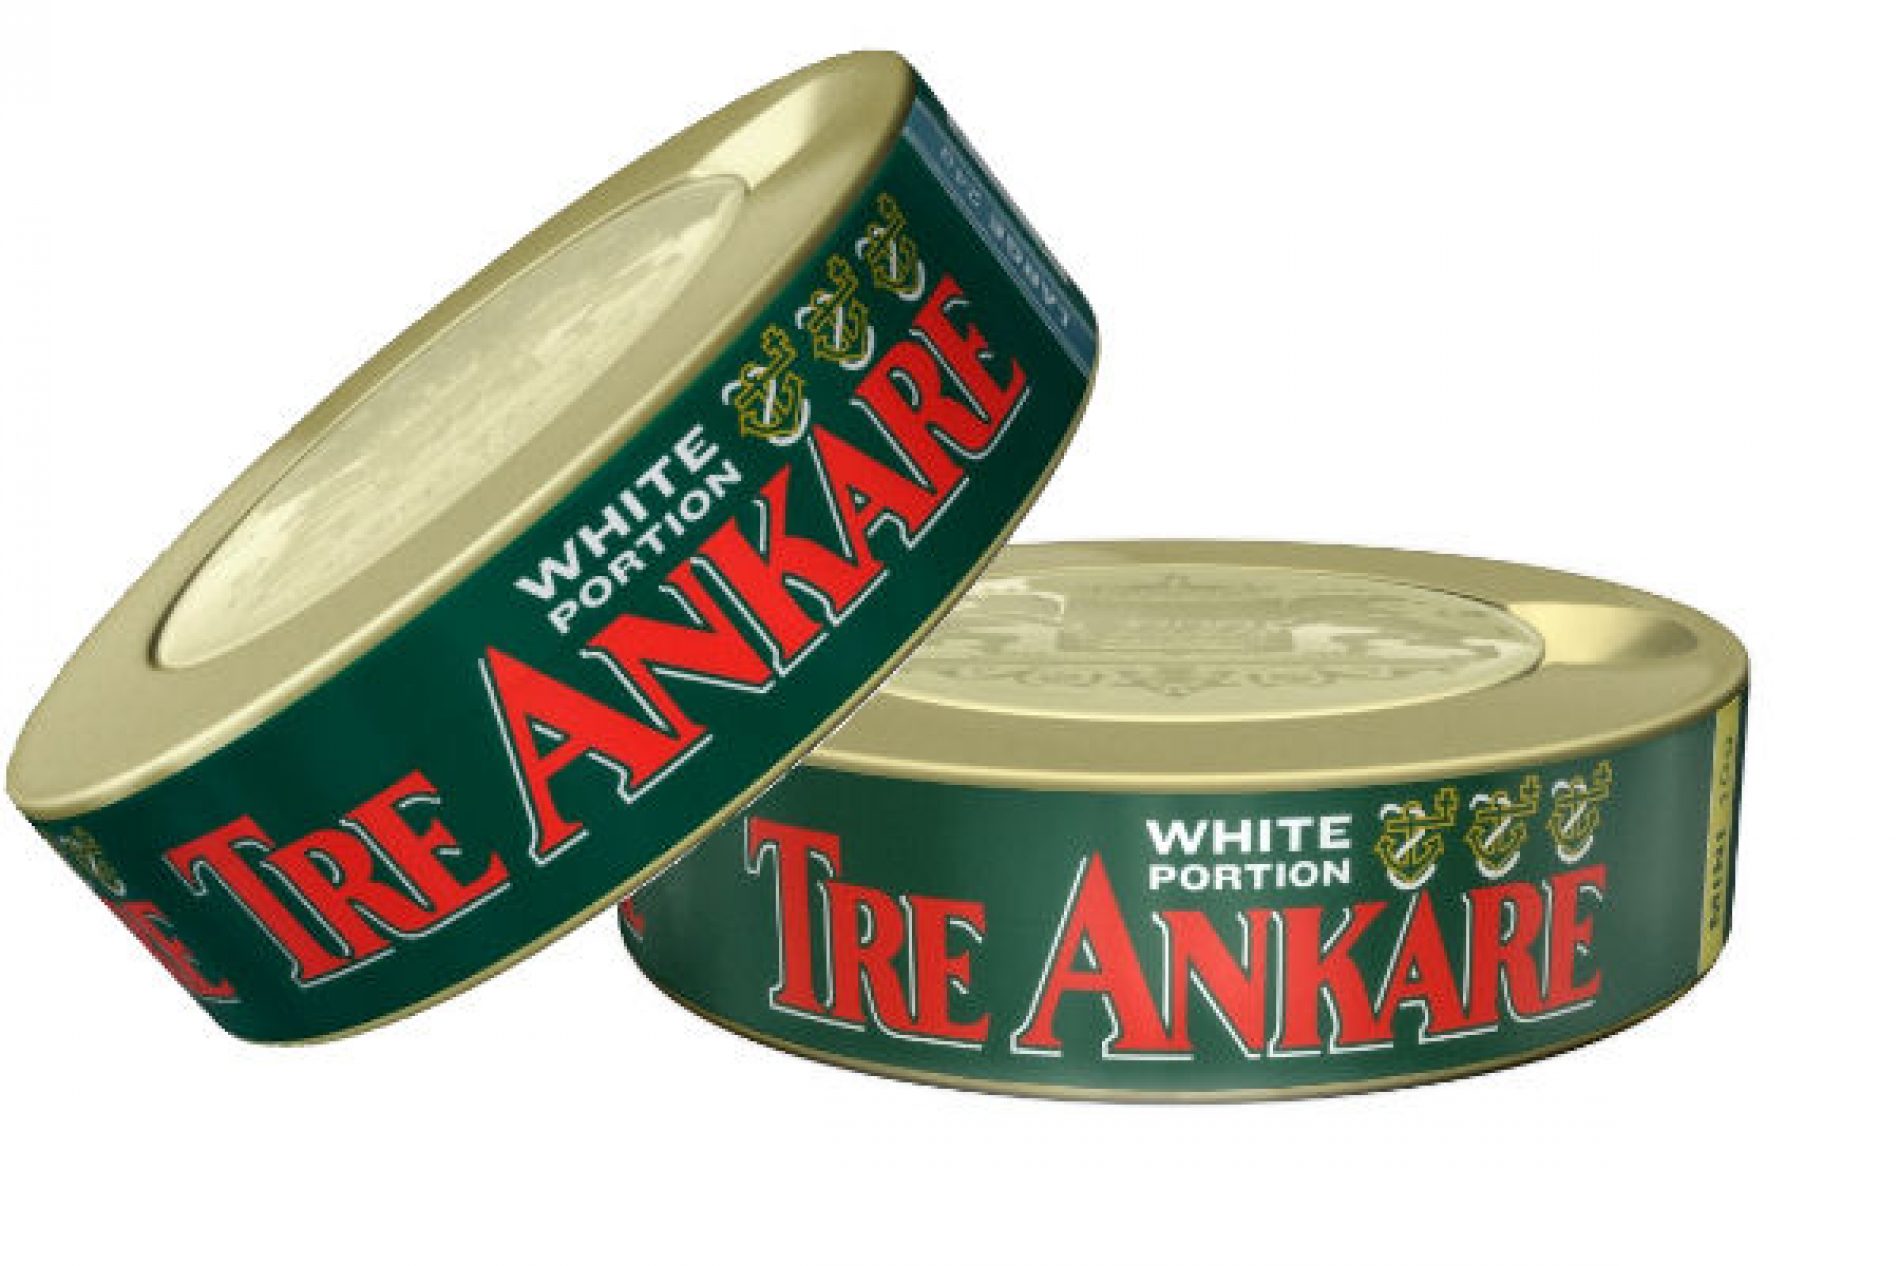 Tre Ankare White and Mini White portion snus. Review of the first value priced portion snus duo!